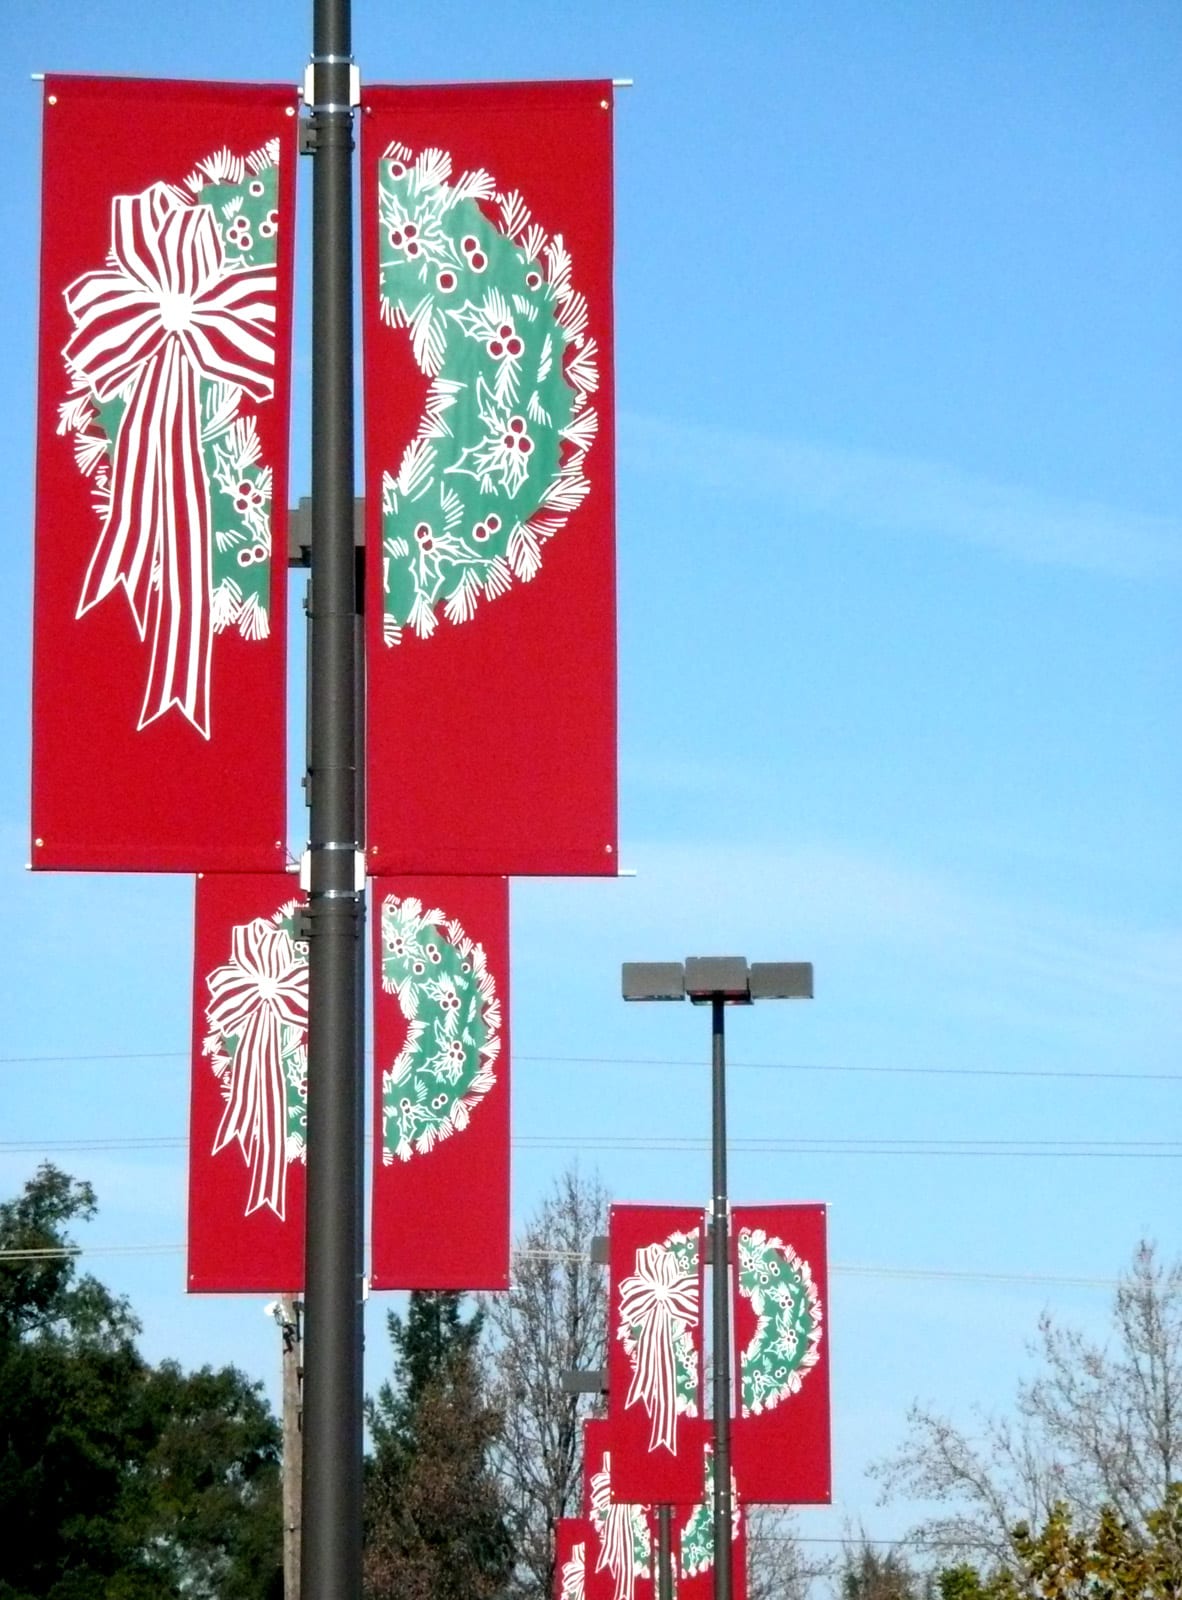 Double banners on light posts